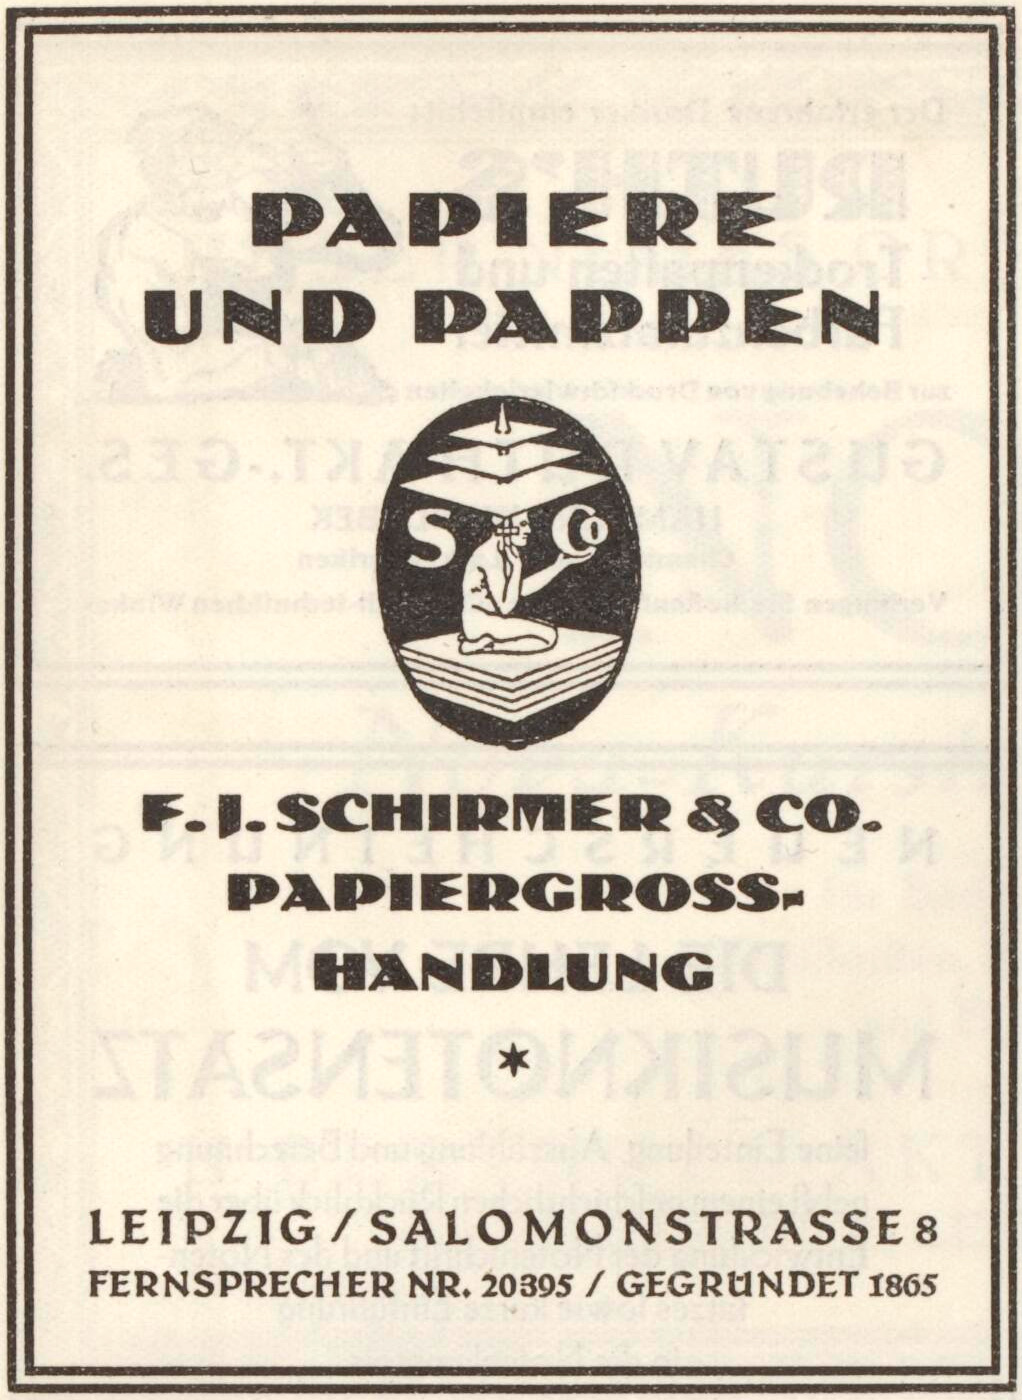 Papiere Und Pappen Ad By F J Schirmer Co Fonts In Use